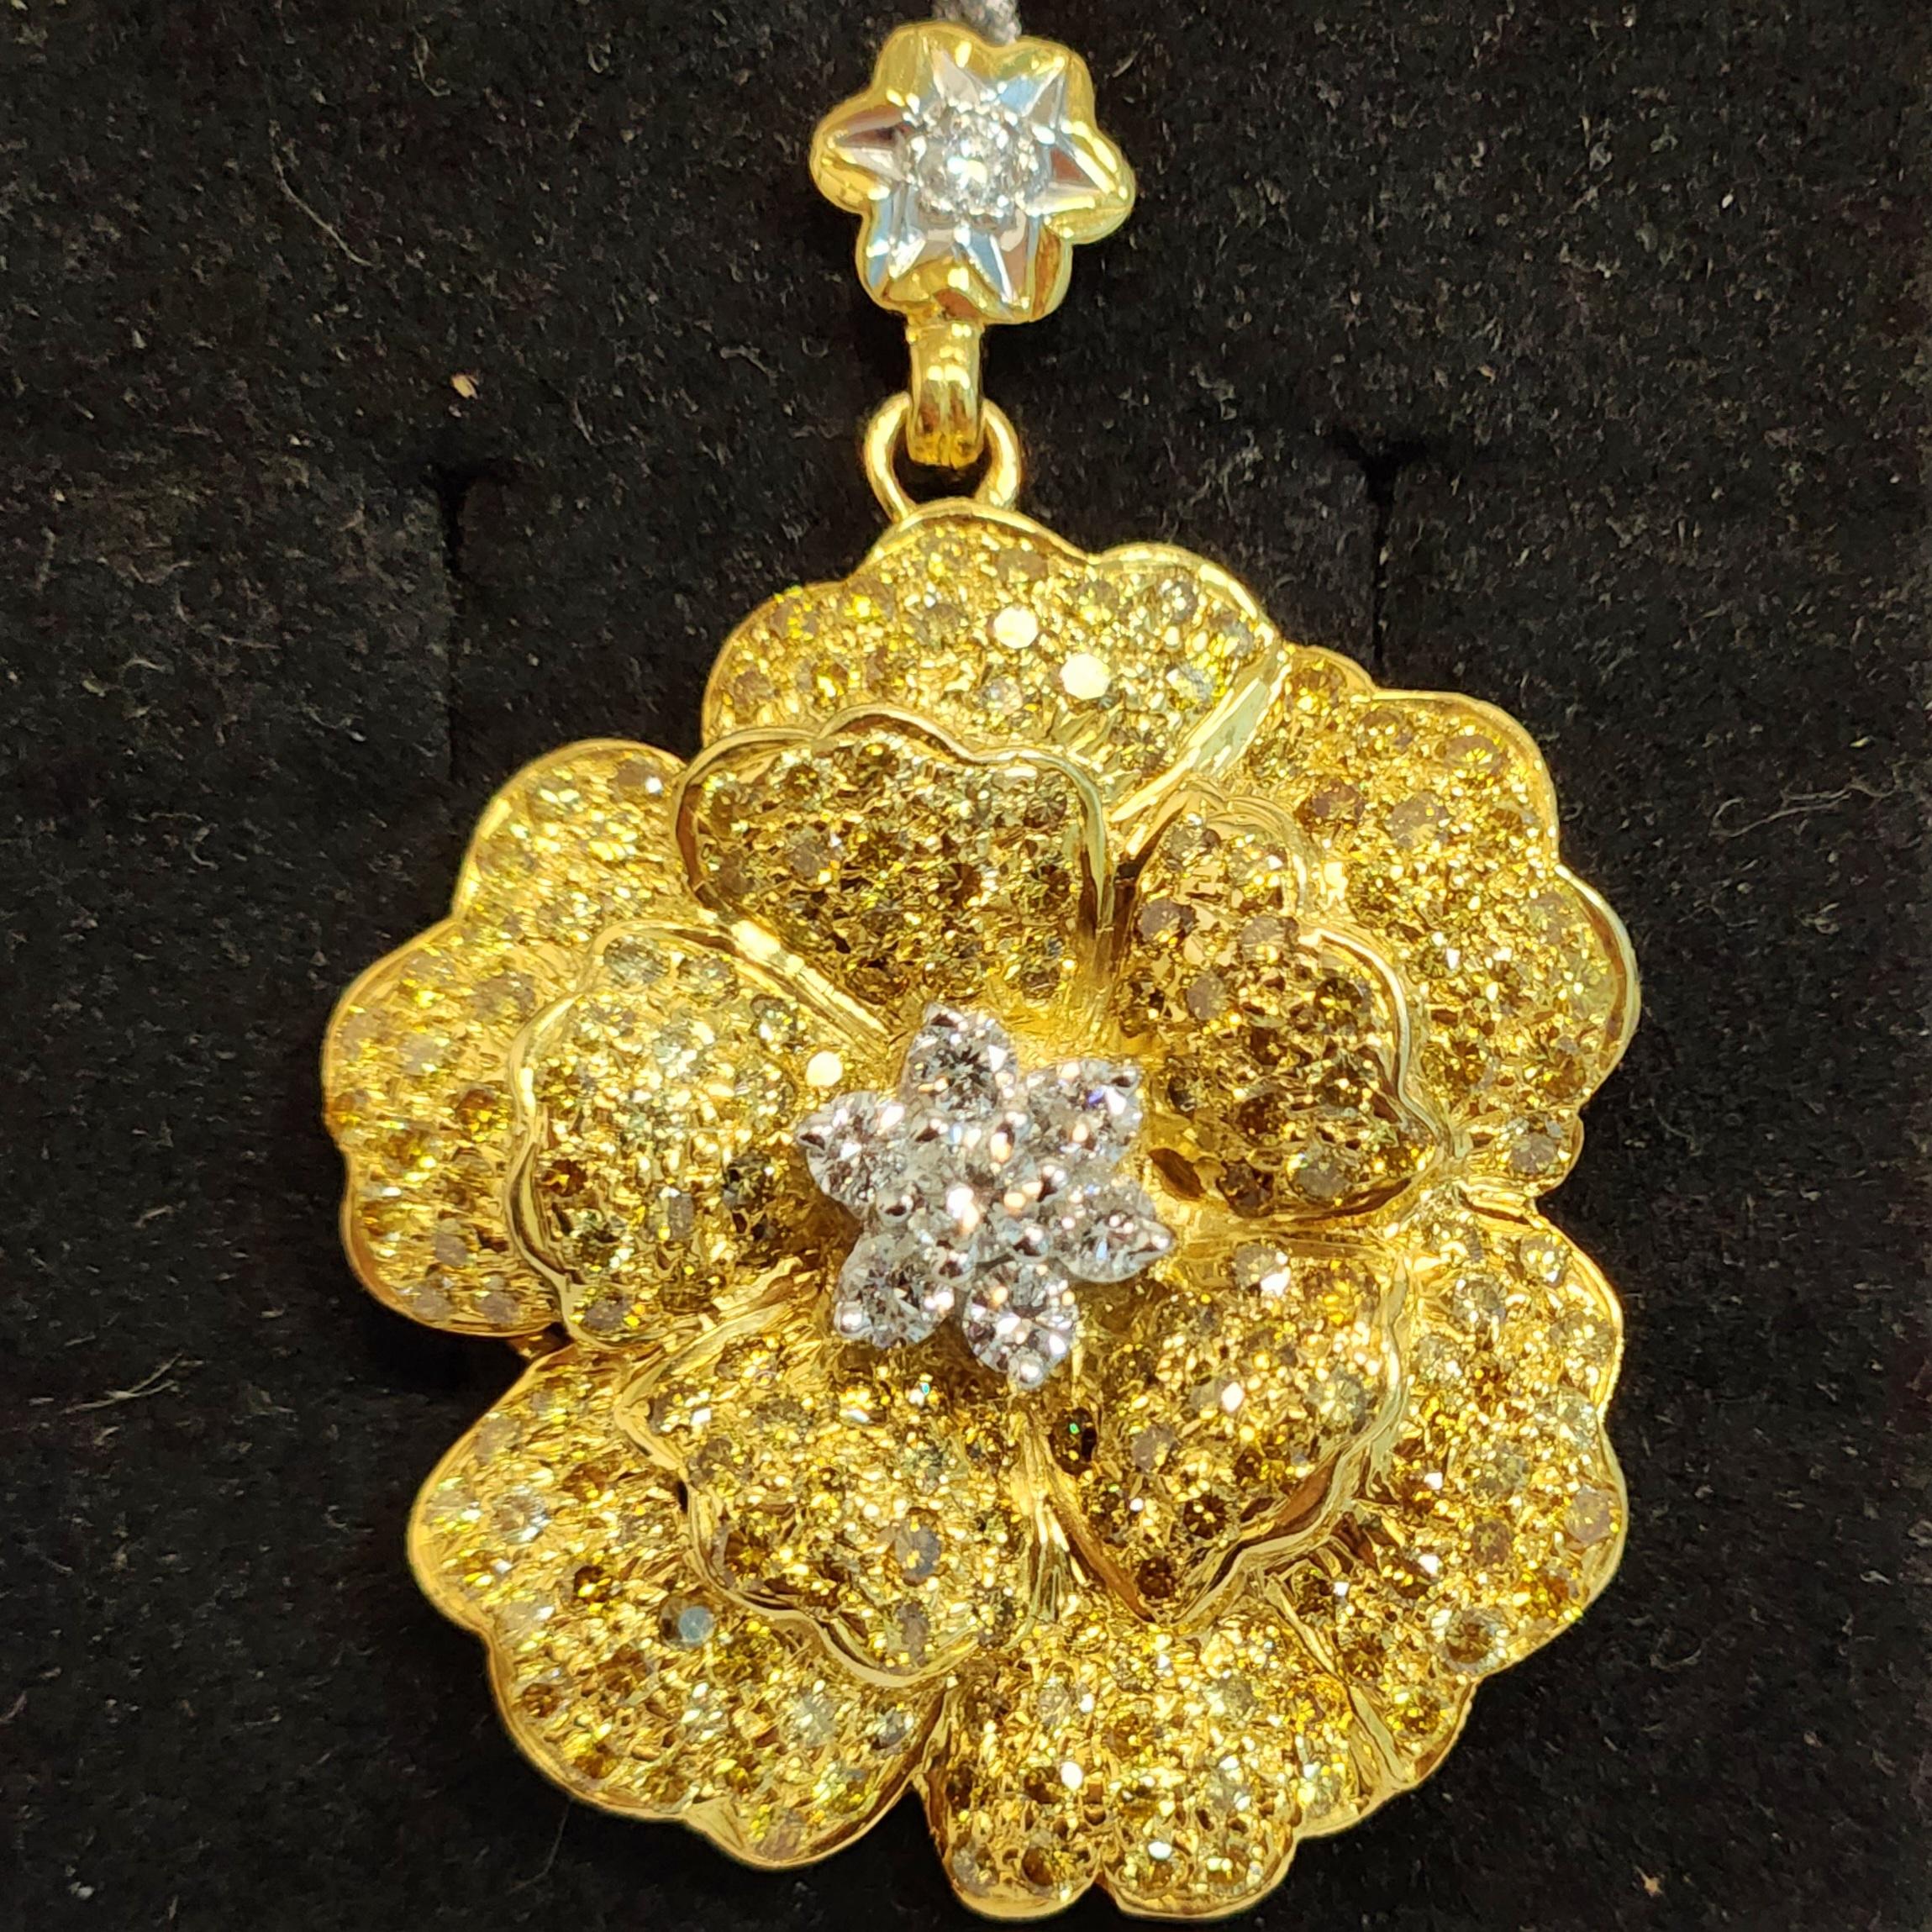 This Flower Shaped Fancy Diamond Pendant is a stunning piece of jewelry that features a beautiful floral design. The center of the flower is crafted with white round diamonds, adding a bright sparkle to the piece. The petals are crafted with shining